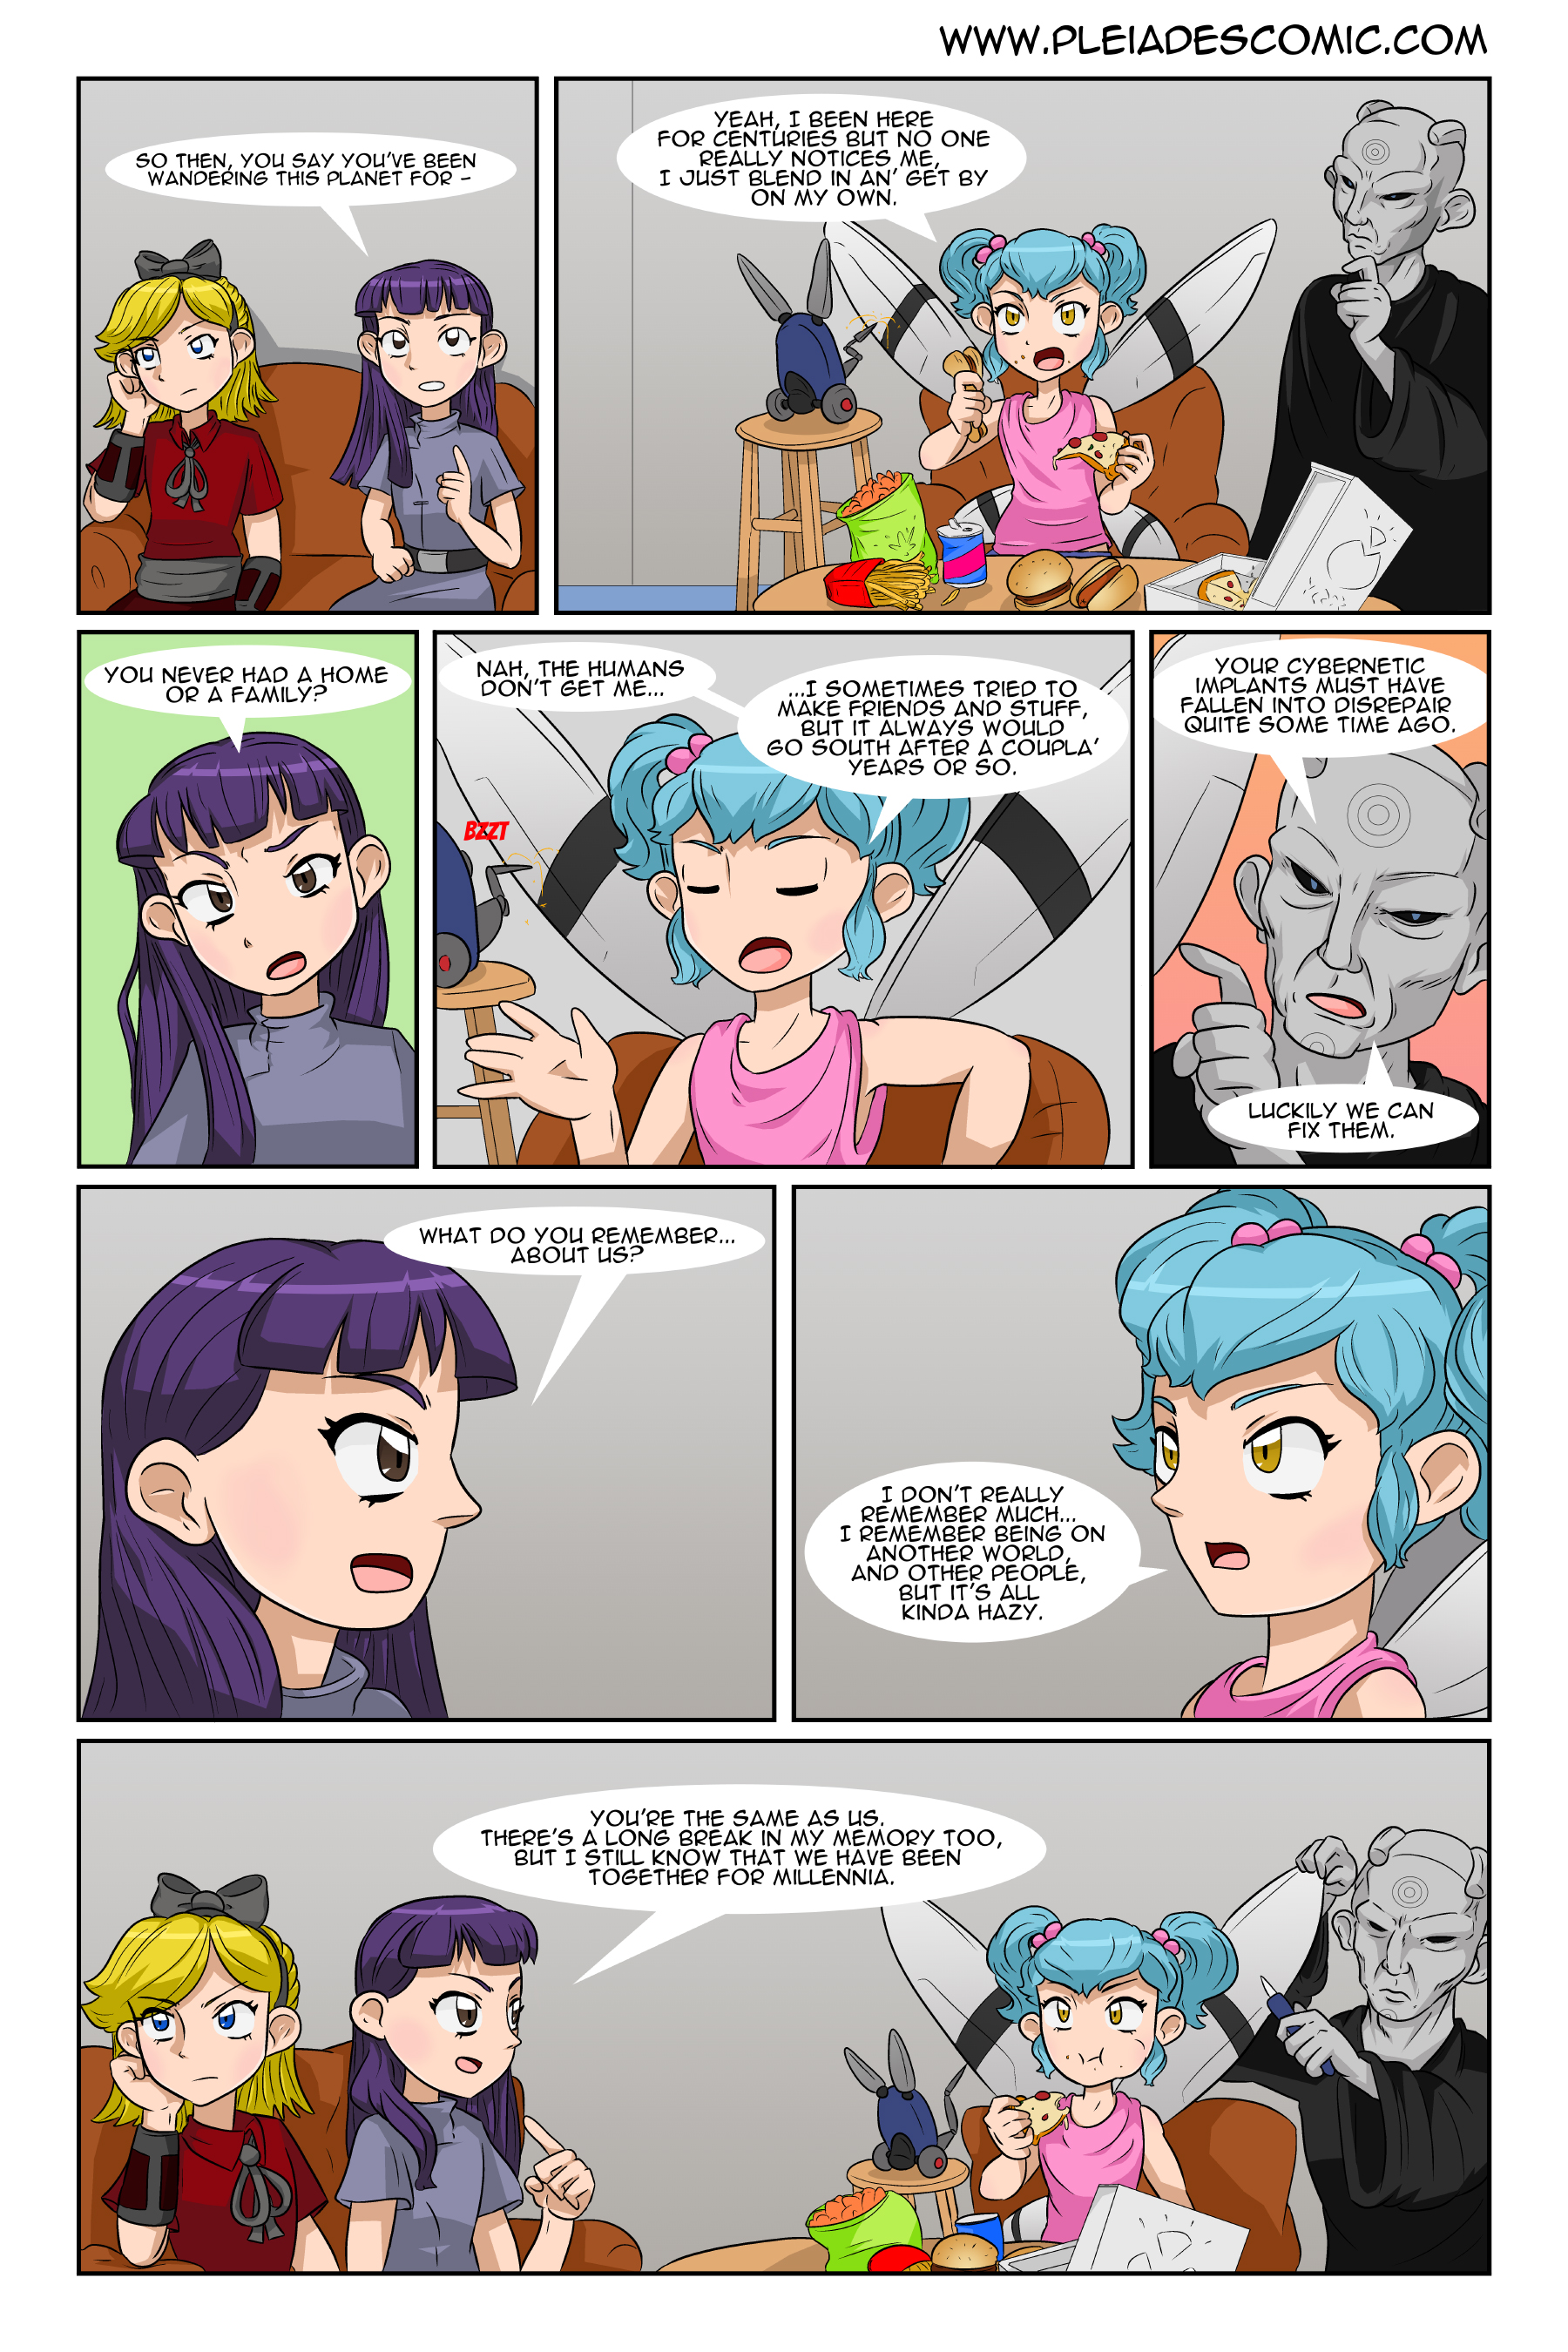 Episode 3: Wrath of the Cyclops – Page 2